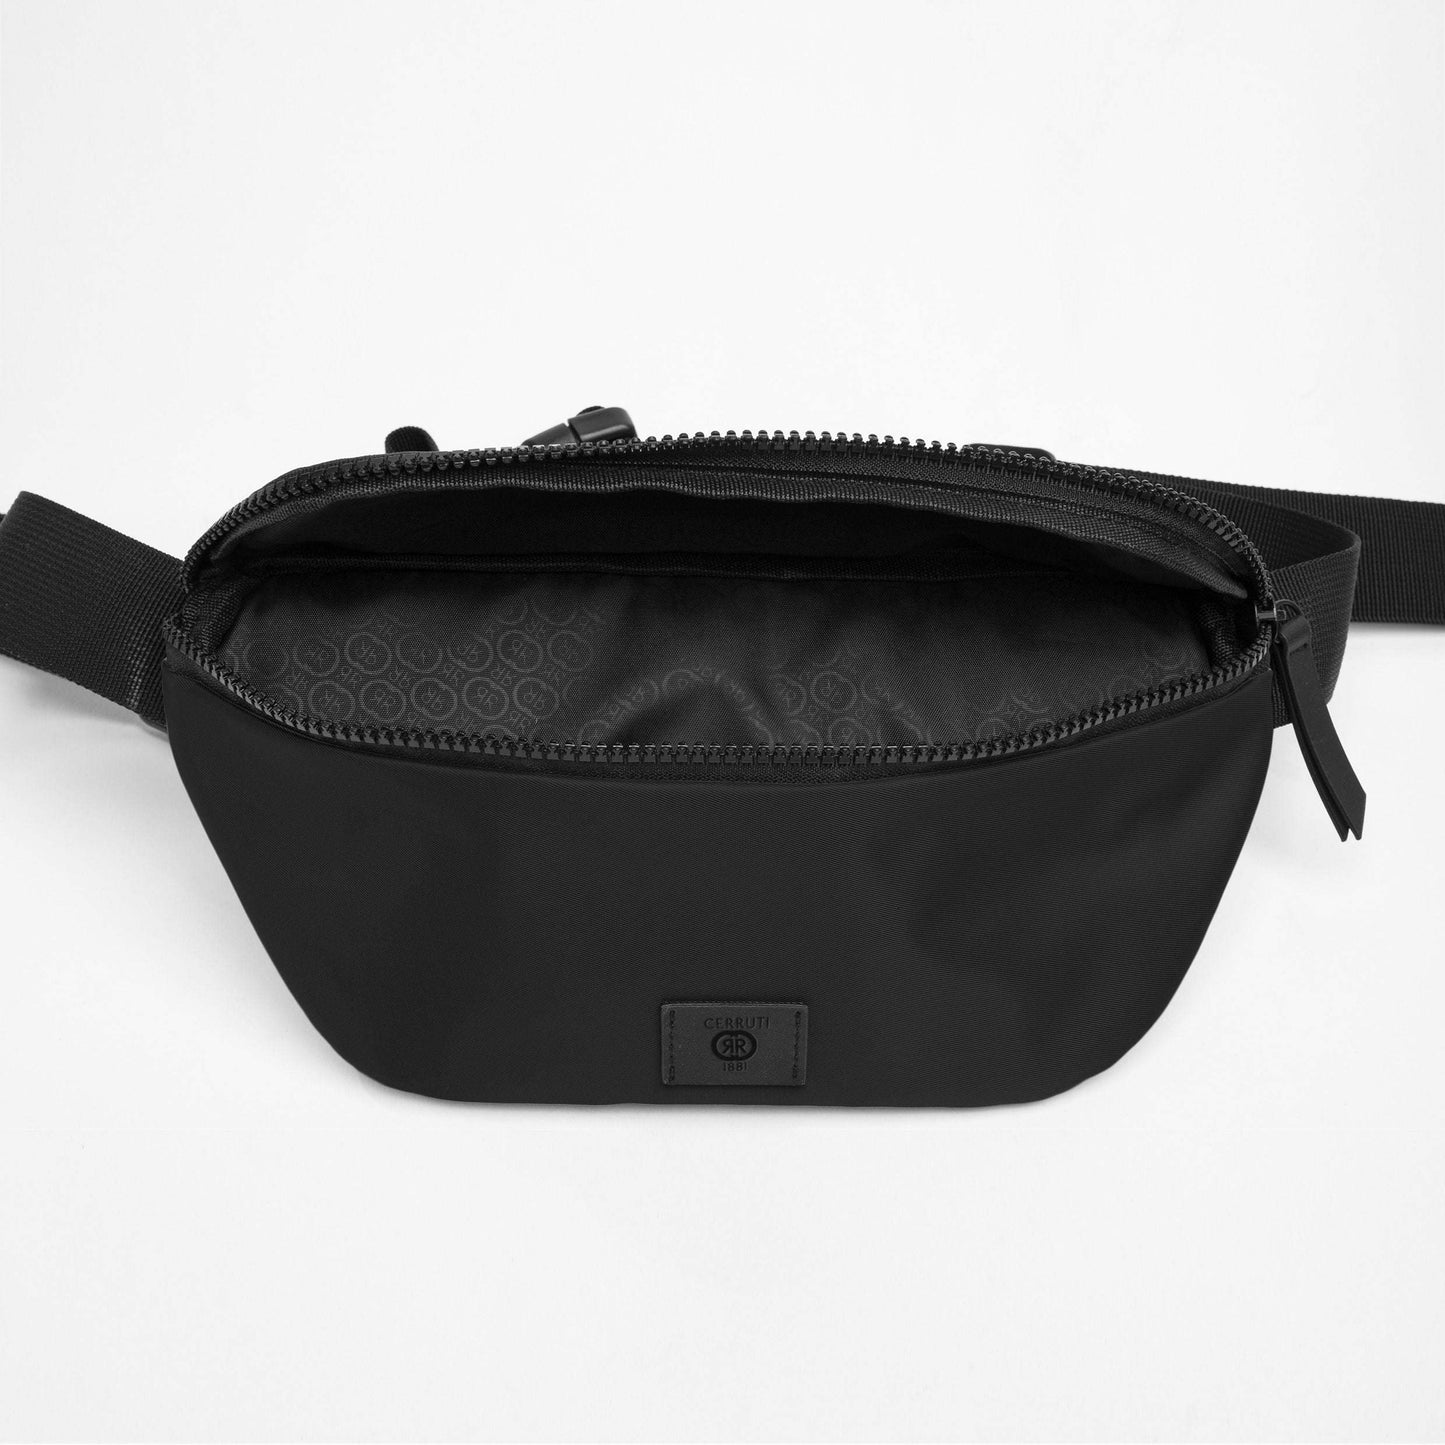 Block Waistpack by Cerruti 1881 - The Luxury Promotional Gifts Company Limited